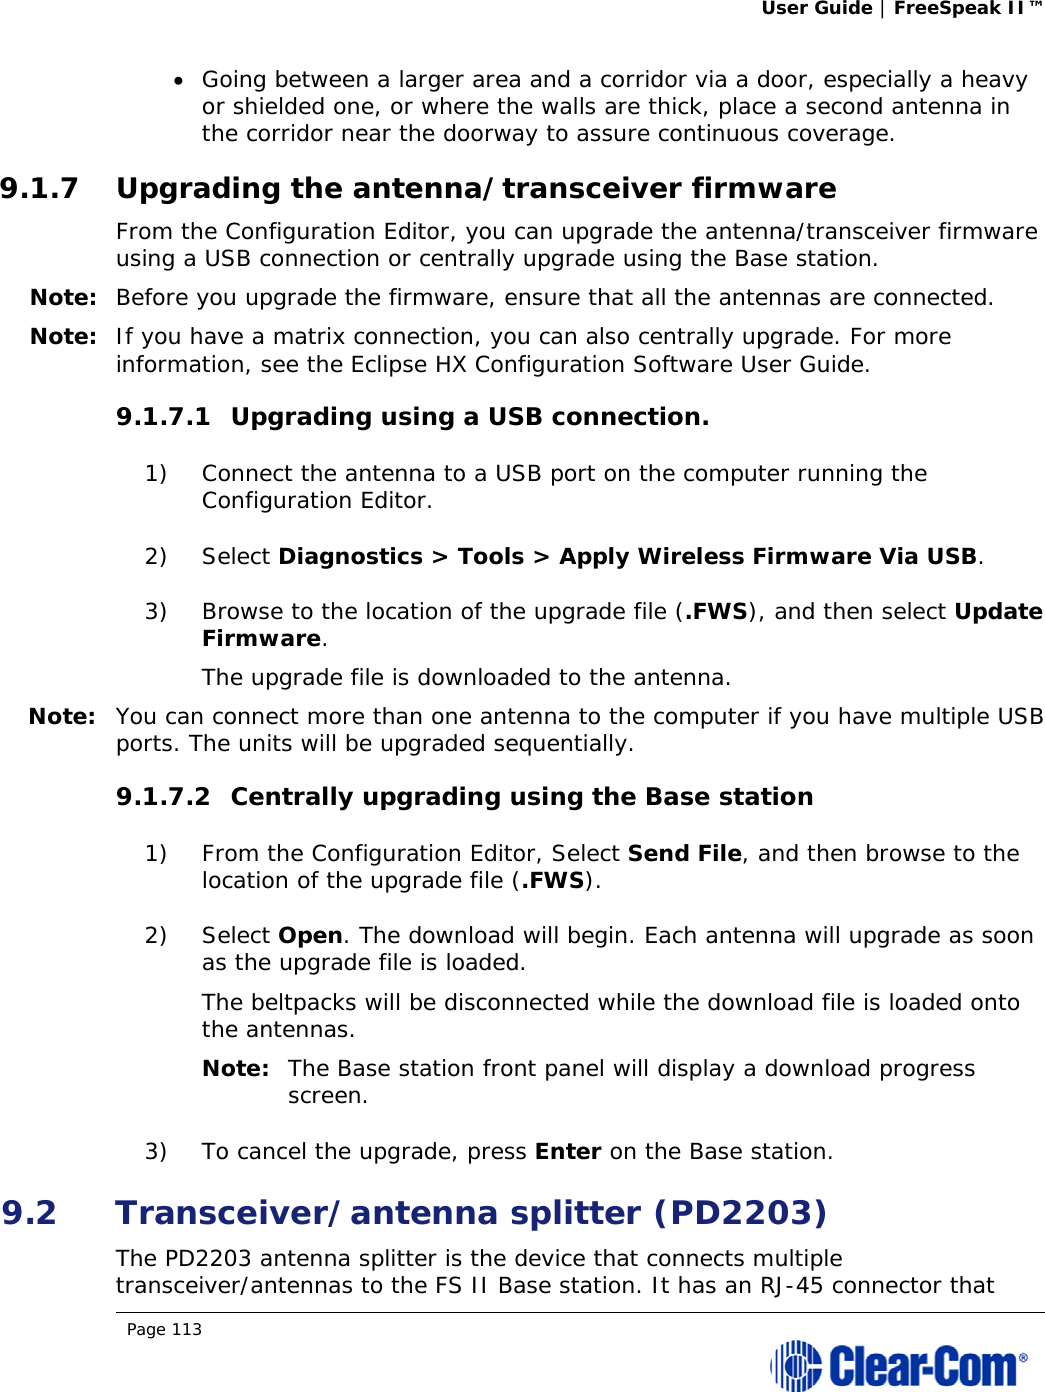 User Guide | FreeSpeak II™  Page 113   Going between a larger area and a corridor via a door, especially a heavy or shielded one, or where the walls are thick, place a second antenna in the corridor near the doorway to assure continuous coverage. 9.1.7 Upgrading the antenna/transceiver firmware From the Configuration Editor, you can upgrade the antenna/transceiver firmware using a USB connection or centrally upgrade using the Base station. Note: Before you upgrade the firmware, ensure that all the antennas are connected. Note: If you have a matrix connection, you can also centrally upgrade. For more information, see the Eclipse HX Configuration Software User Guide. 9.1.7.1 Upgrading using a USB connection. 1) Connect the antenna to a USB port on the computer running the Configuration Editor. 2) Select Diagnostics &gt; Tools &gt; Apply Wireless Firmware Via USB. 3) Browse to the location of the upgrade file (.FWS), and then select Update Firmware. The upgrade file is downloaded to the antenna. Note: You can connect more than one antenna to the computer if you have multiple USB ports. The units will be upgraded sequentially. 9.1.7.2 Centrally upgrading using the Base station 1) From the Configuration Editor, Select Send File, and then browse to the location of the upgrade file (.FWS). 2) Select Open. The download will begin. Each antenna will upgrade as soon as the upgrade file is loaded. The beltpacks will be disconnected while the download file is loaded onto the antennas.  Note: The Base station front panel will display a download progress screen. 3) To cancel the upgrade, press Enter on the Base station. 9.2 Transceiver/antenna splitter (PD2203) The PD2203 antenna splitter is the device that connects multiple transceiver/antennas to the FS II Base station. It has an RJ-45 connector that 